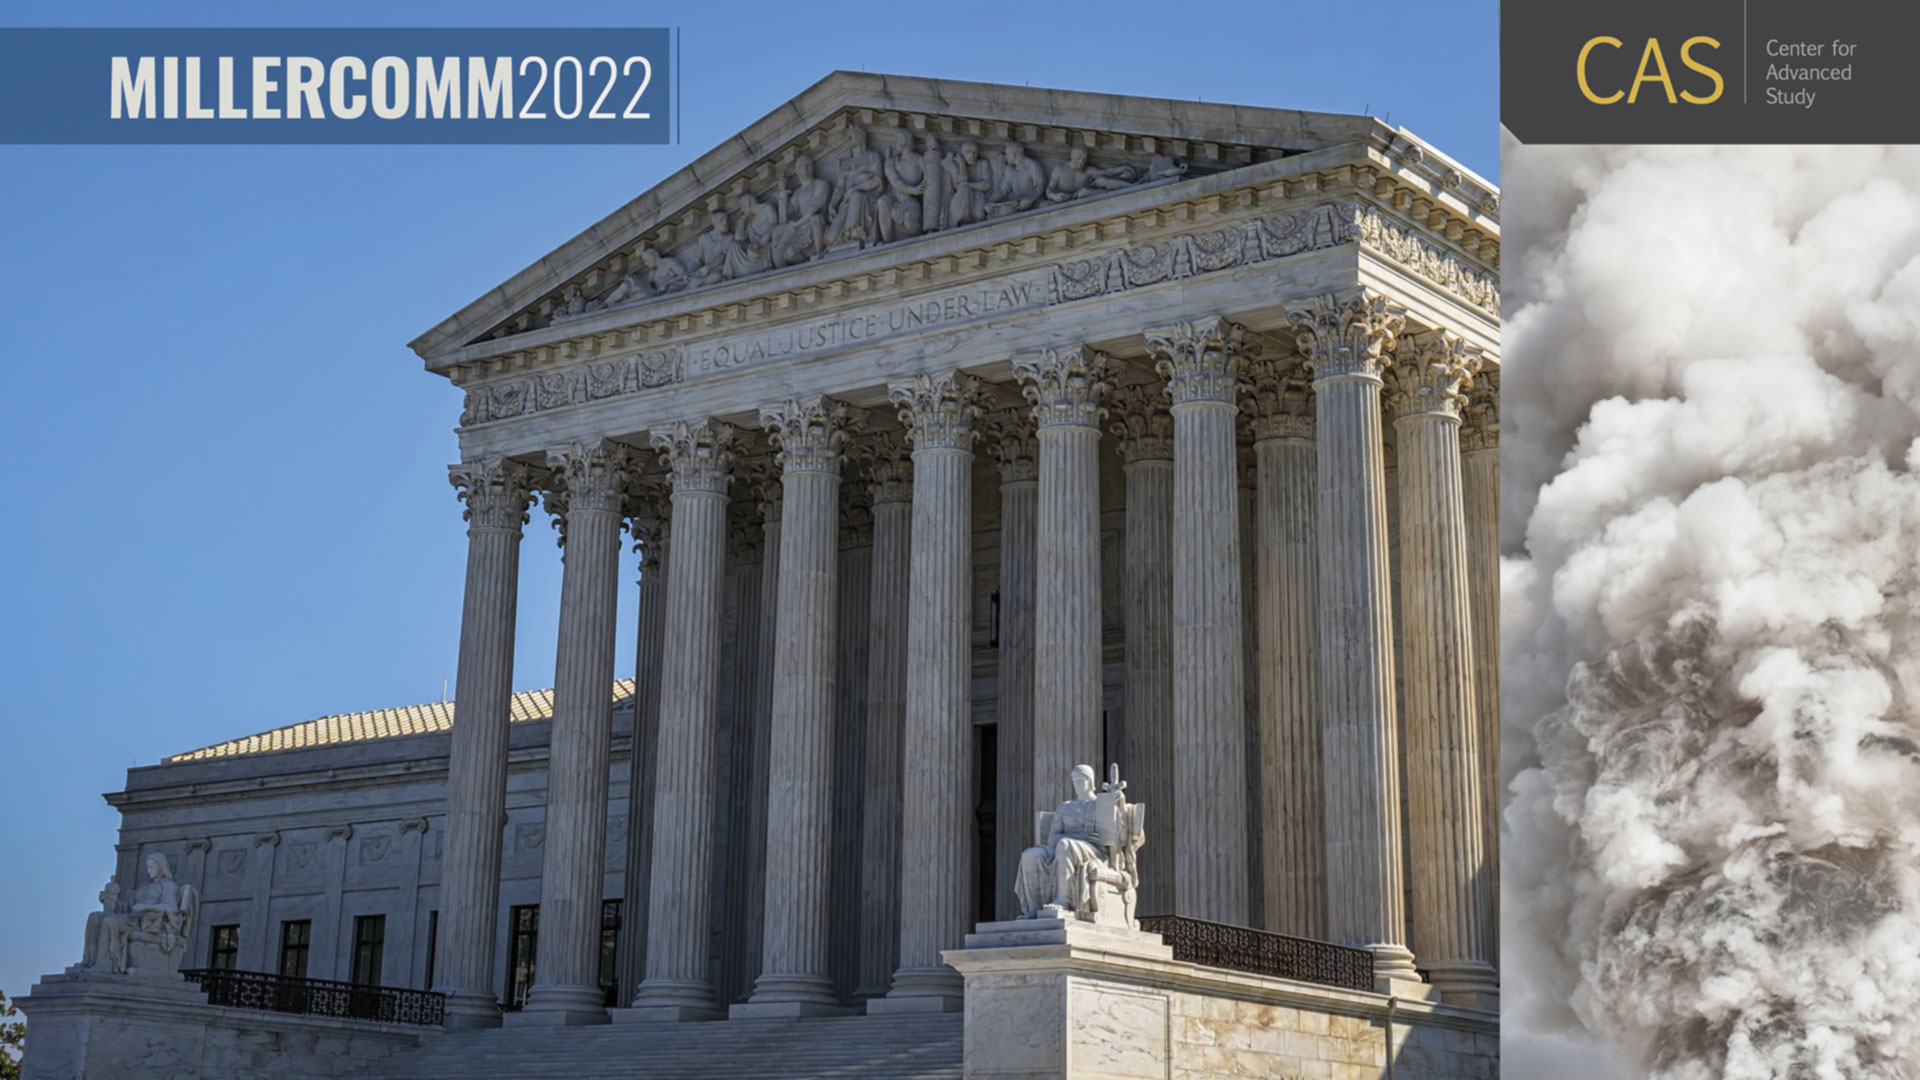 Exterior of the Supreme Court building with a separate image of a puff of smoke. Millercomm 2022 CAS